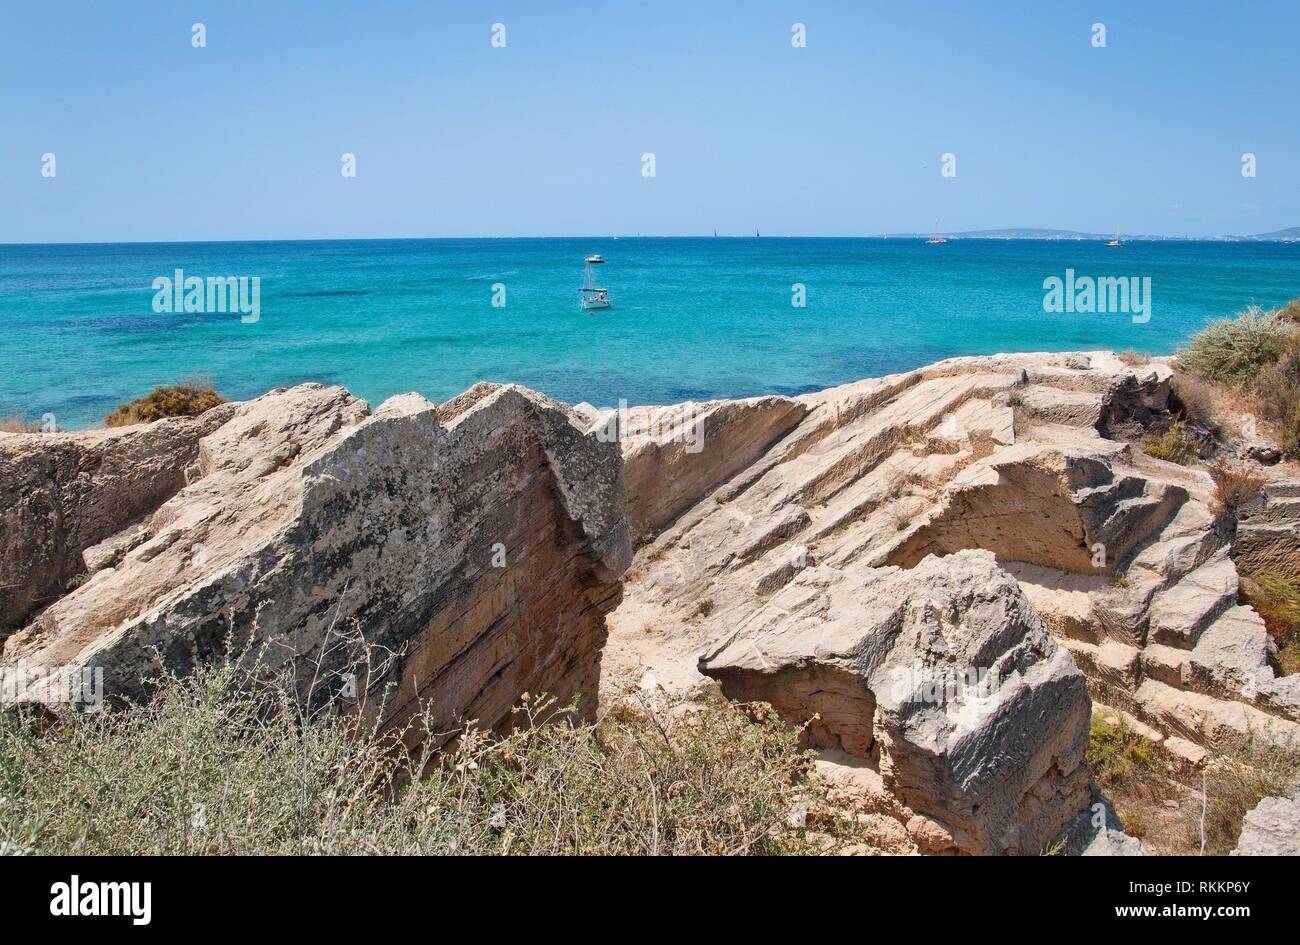 Coastal rock landscape and small boats in turquoise sea with horizon on a sunny summer day in Mallorca, Spain. Stock Photo